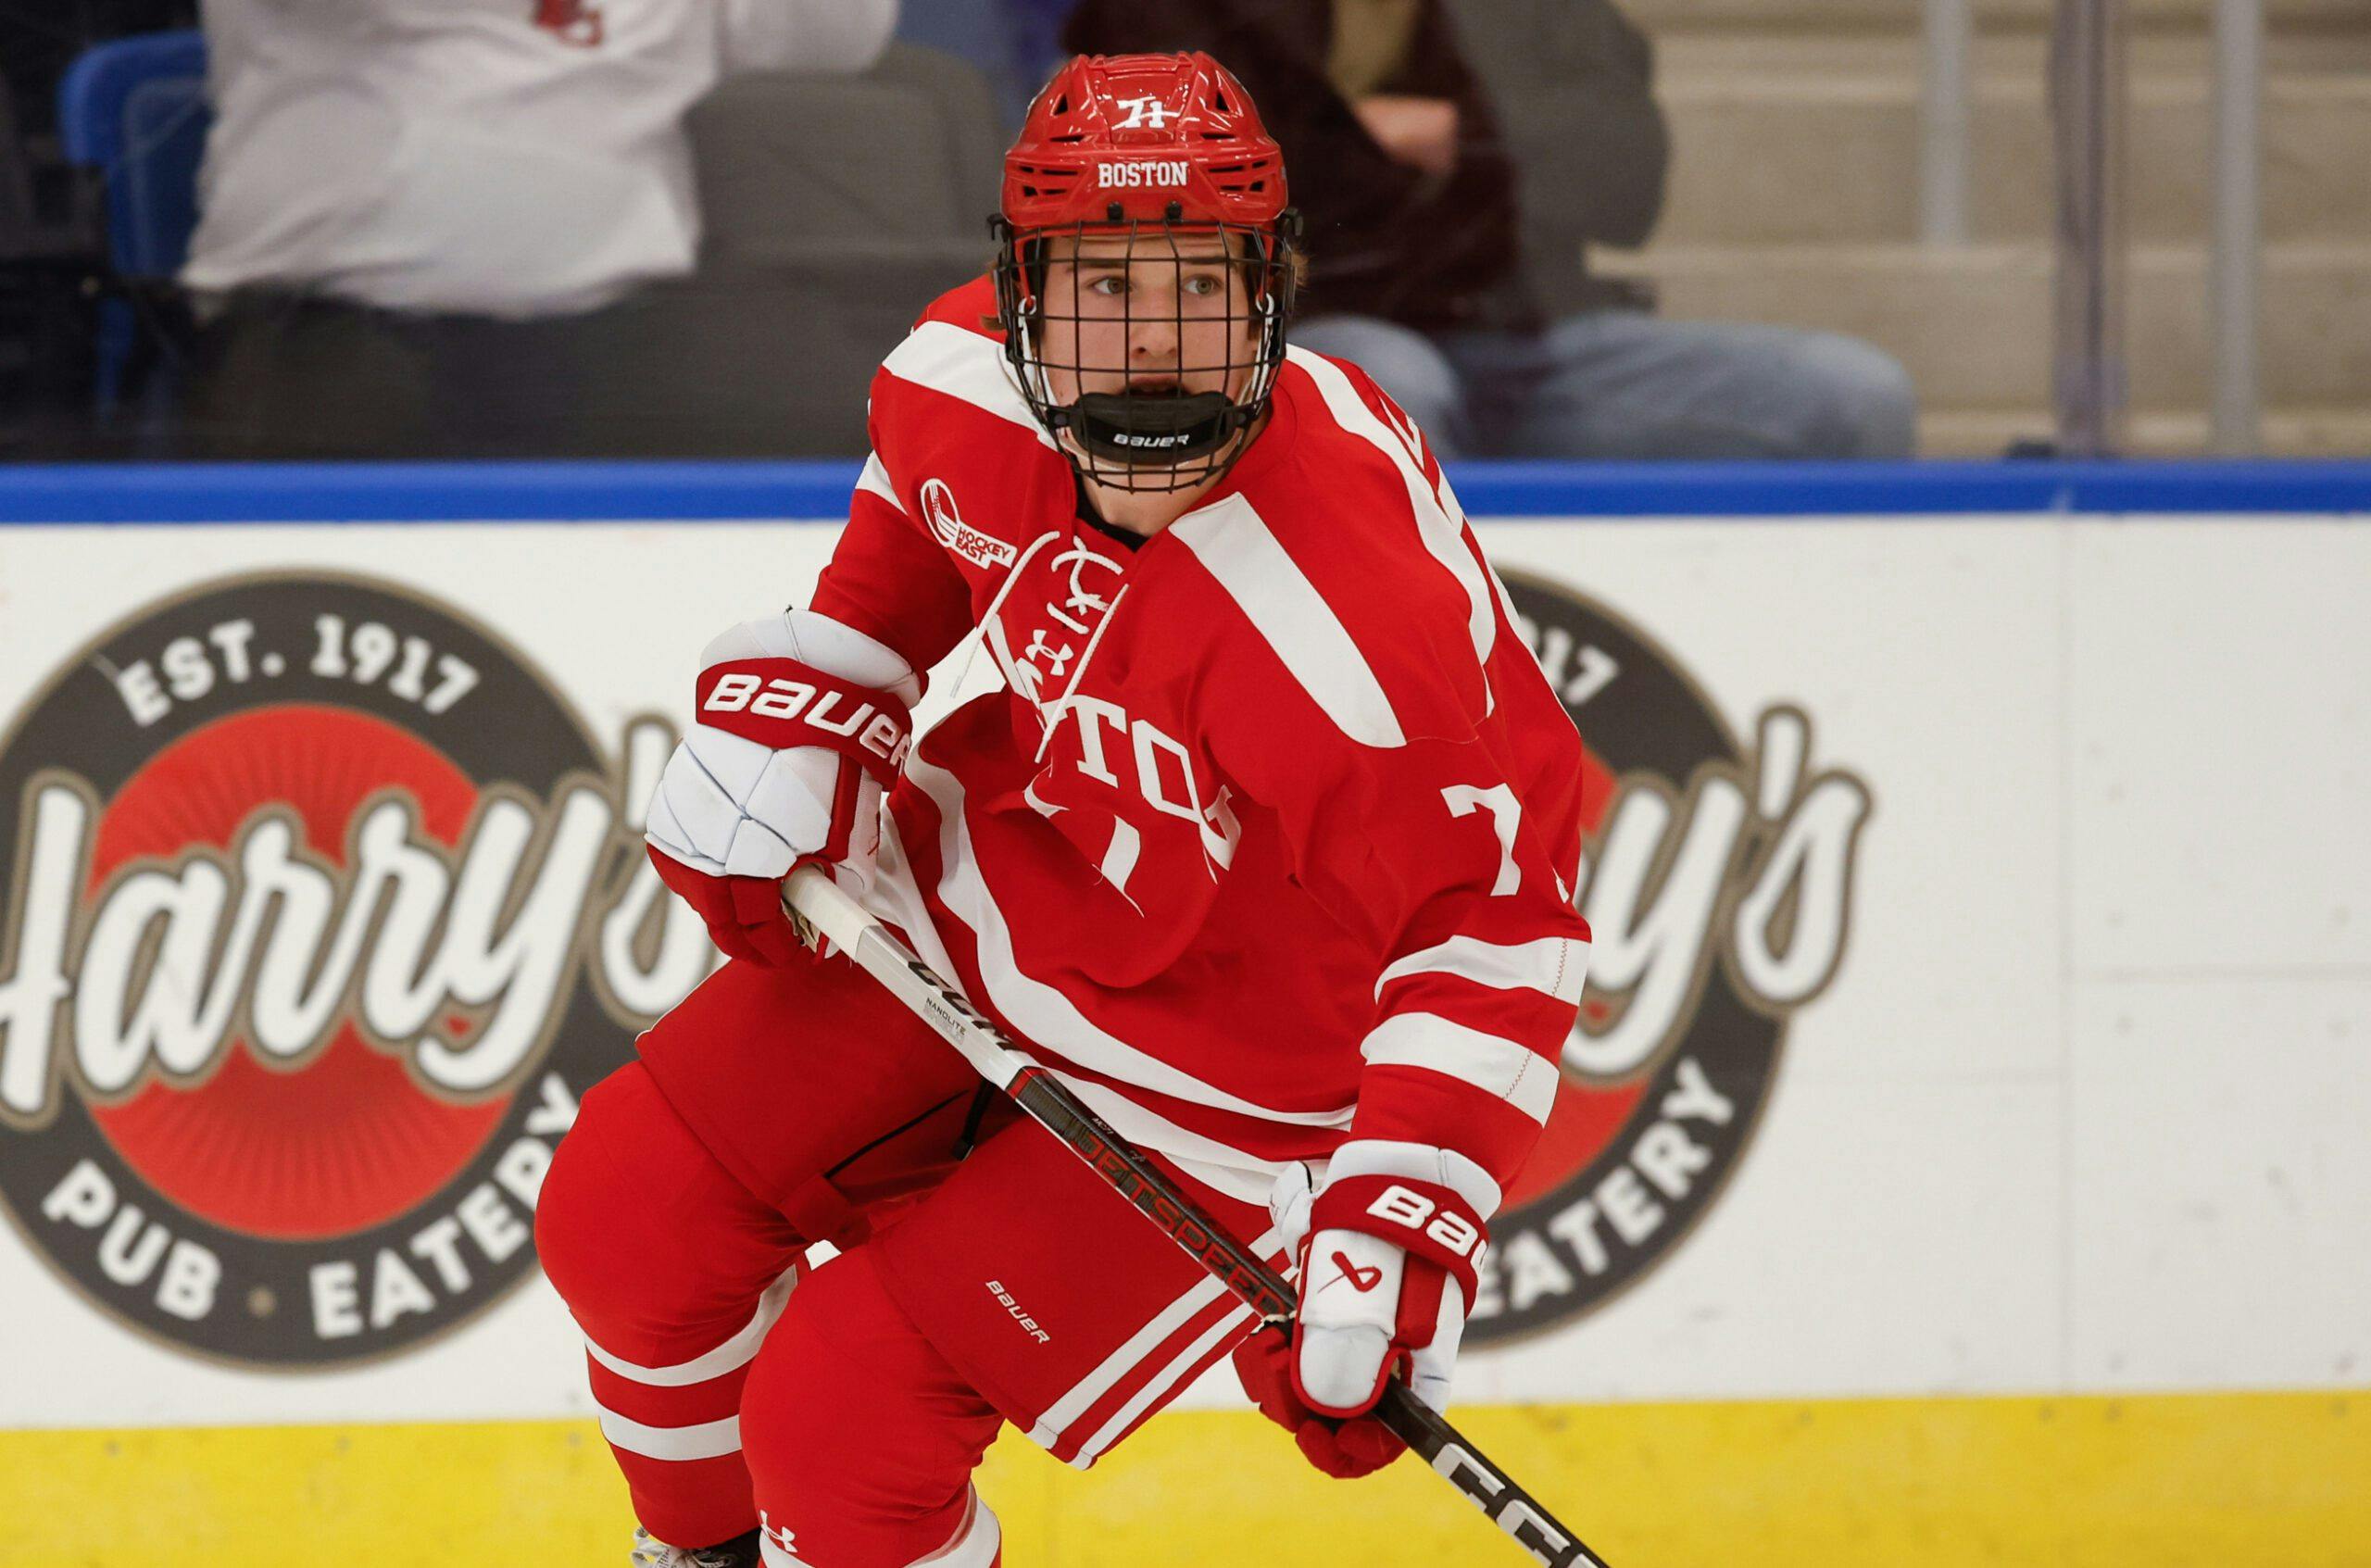 Macklin Celebrini breaks long-standing NCAA record with 32nd goal at age 17